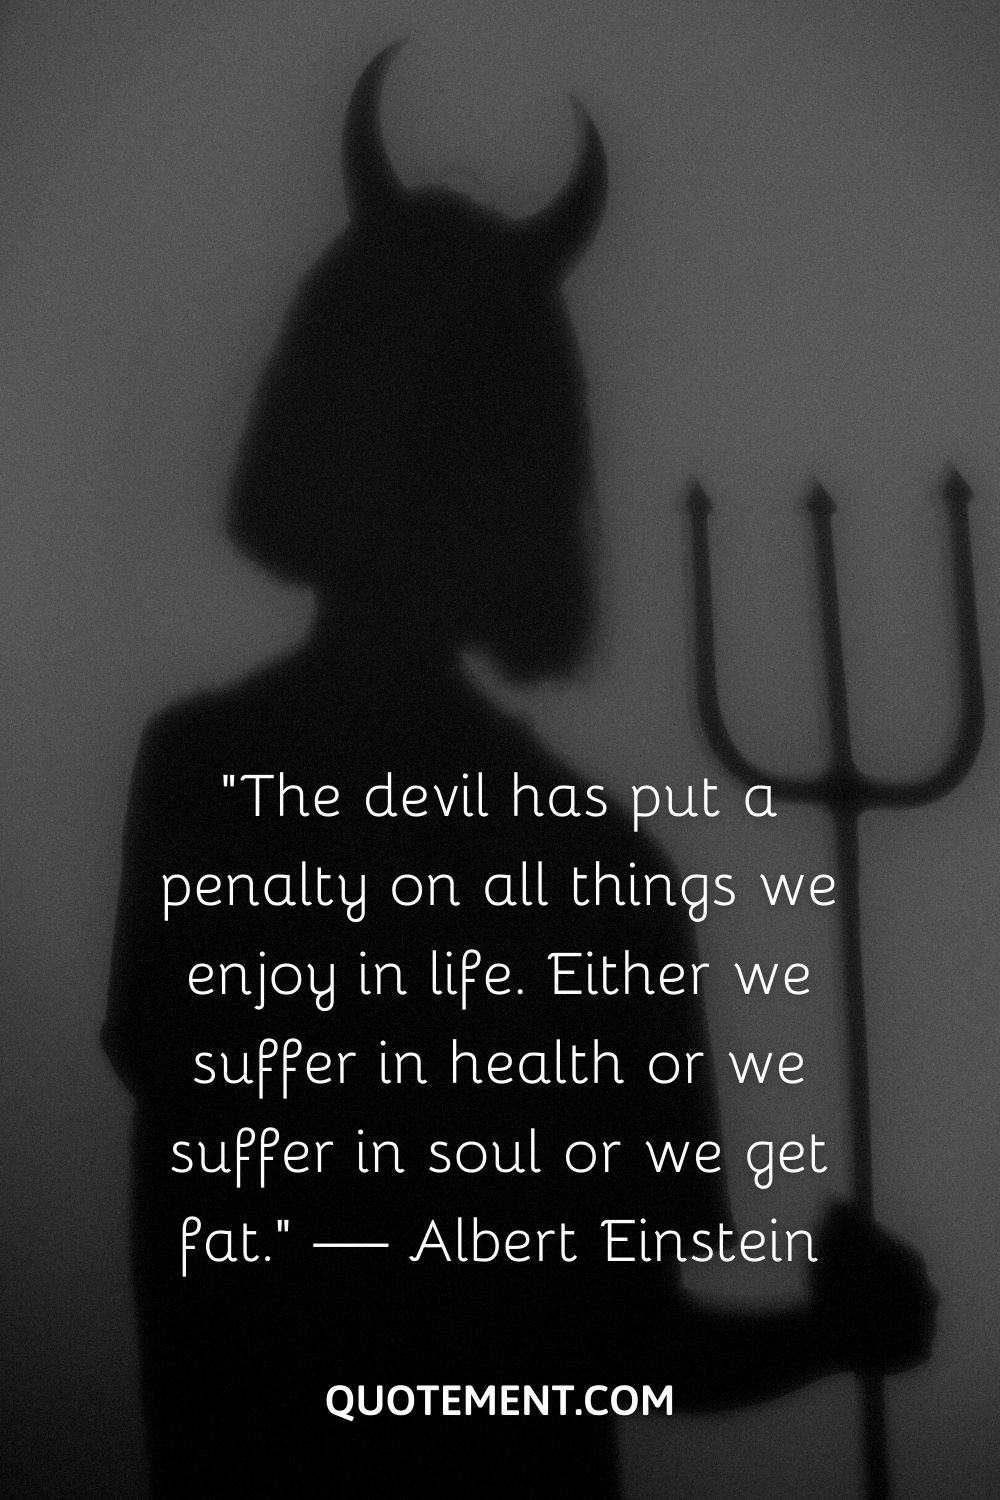 “The devil has put a penalty on all things we enjoy in life. Either we suffer in health or we suffer  in soul or we get fat.” — Albert Einstein